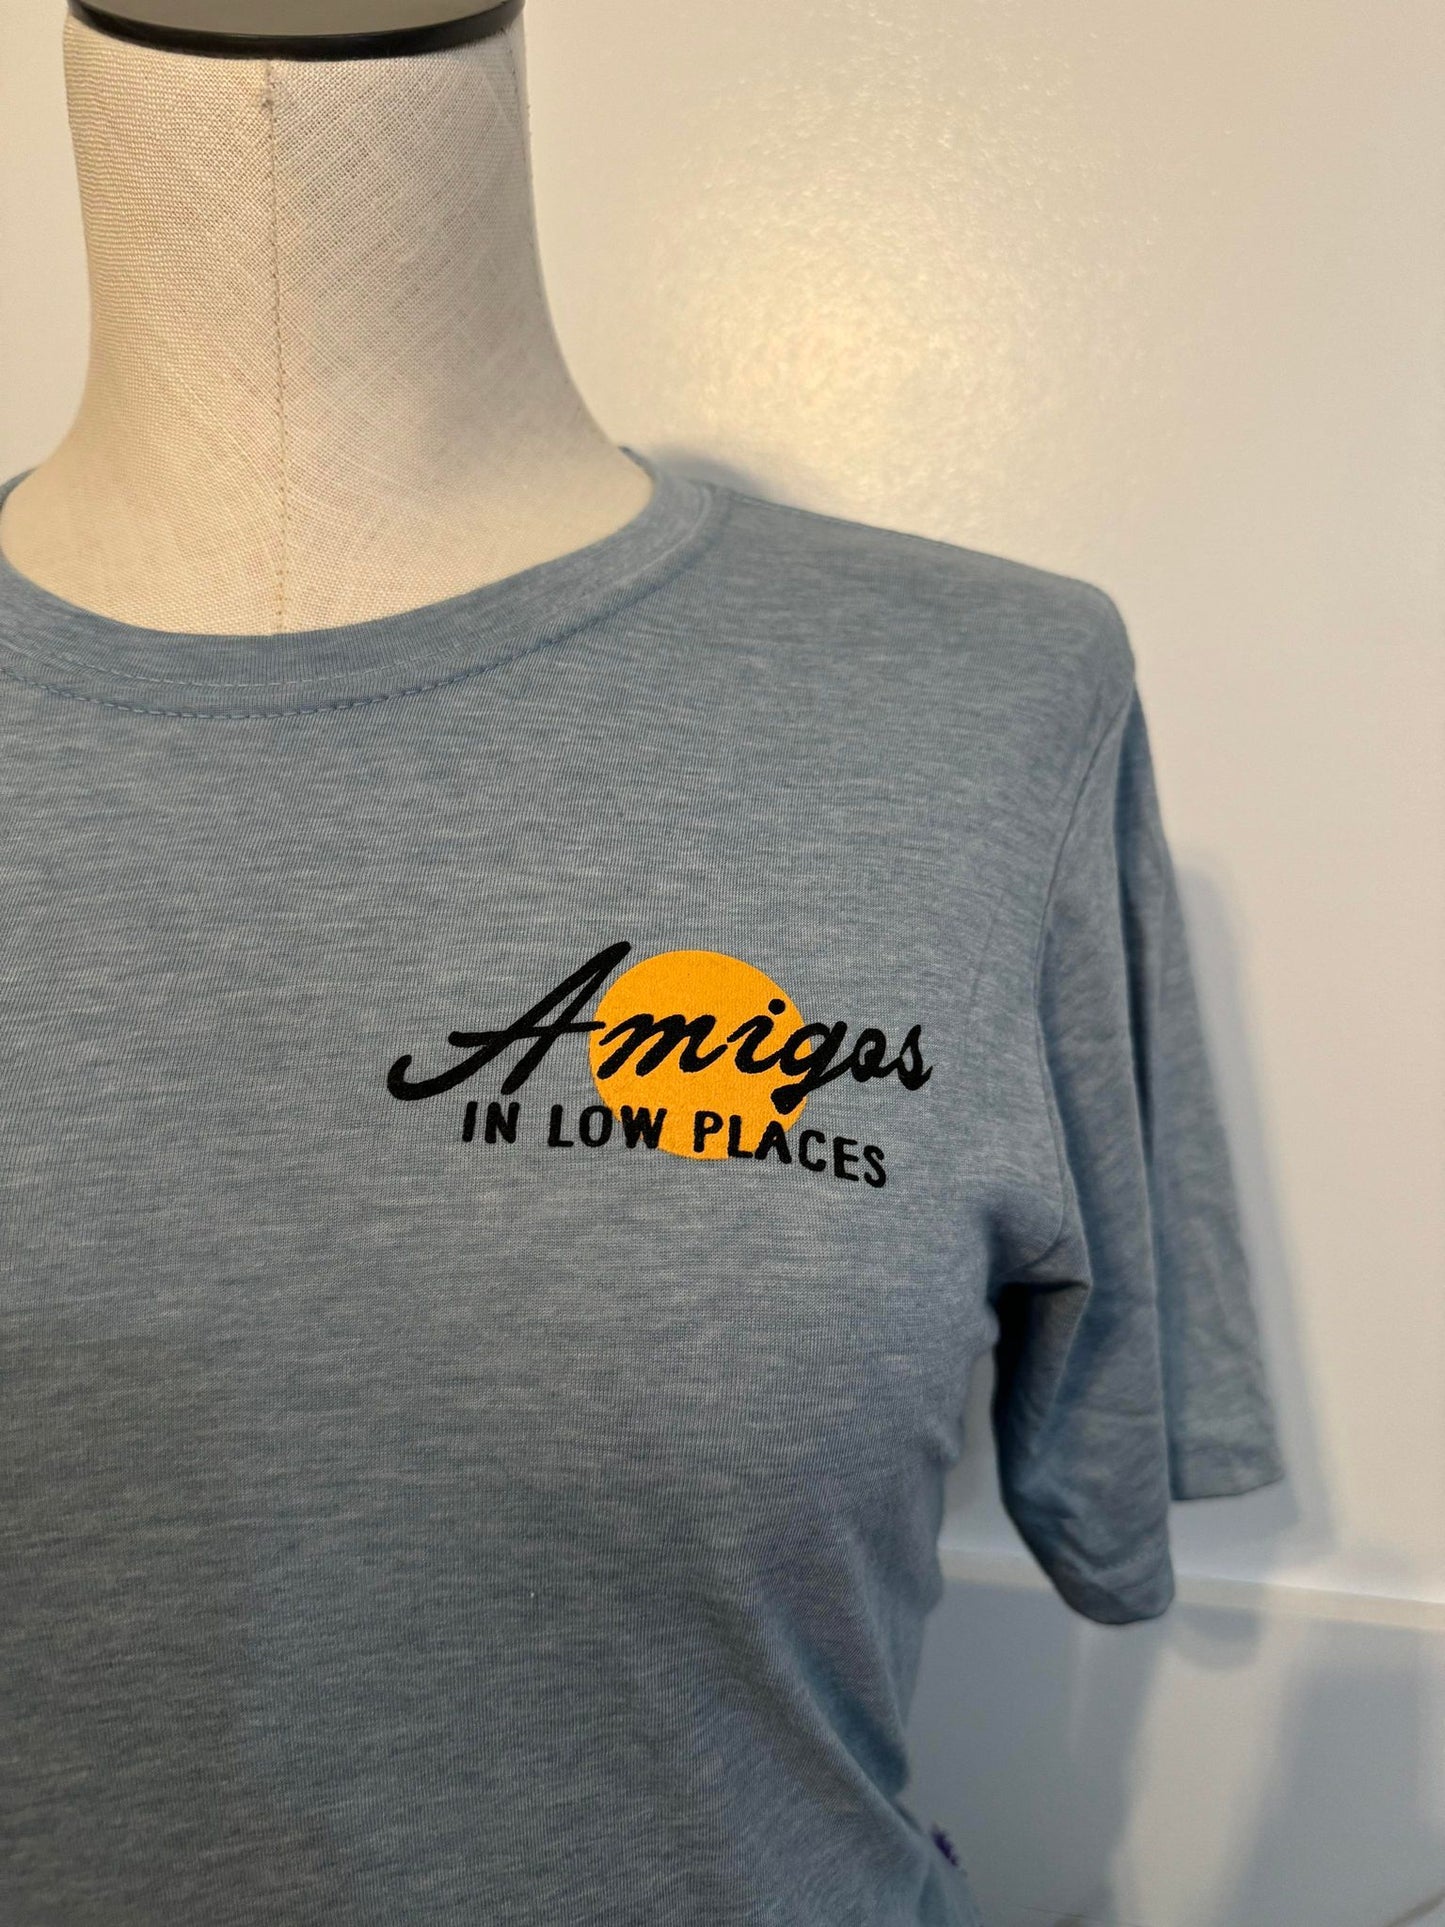 "Amigos in Low Places" T-Shirt